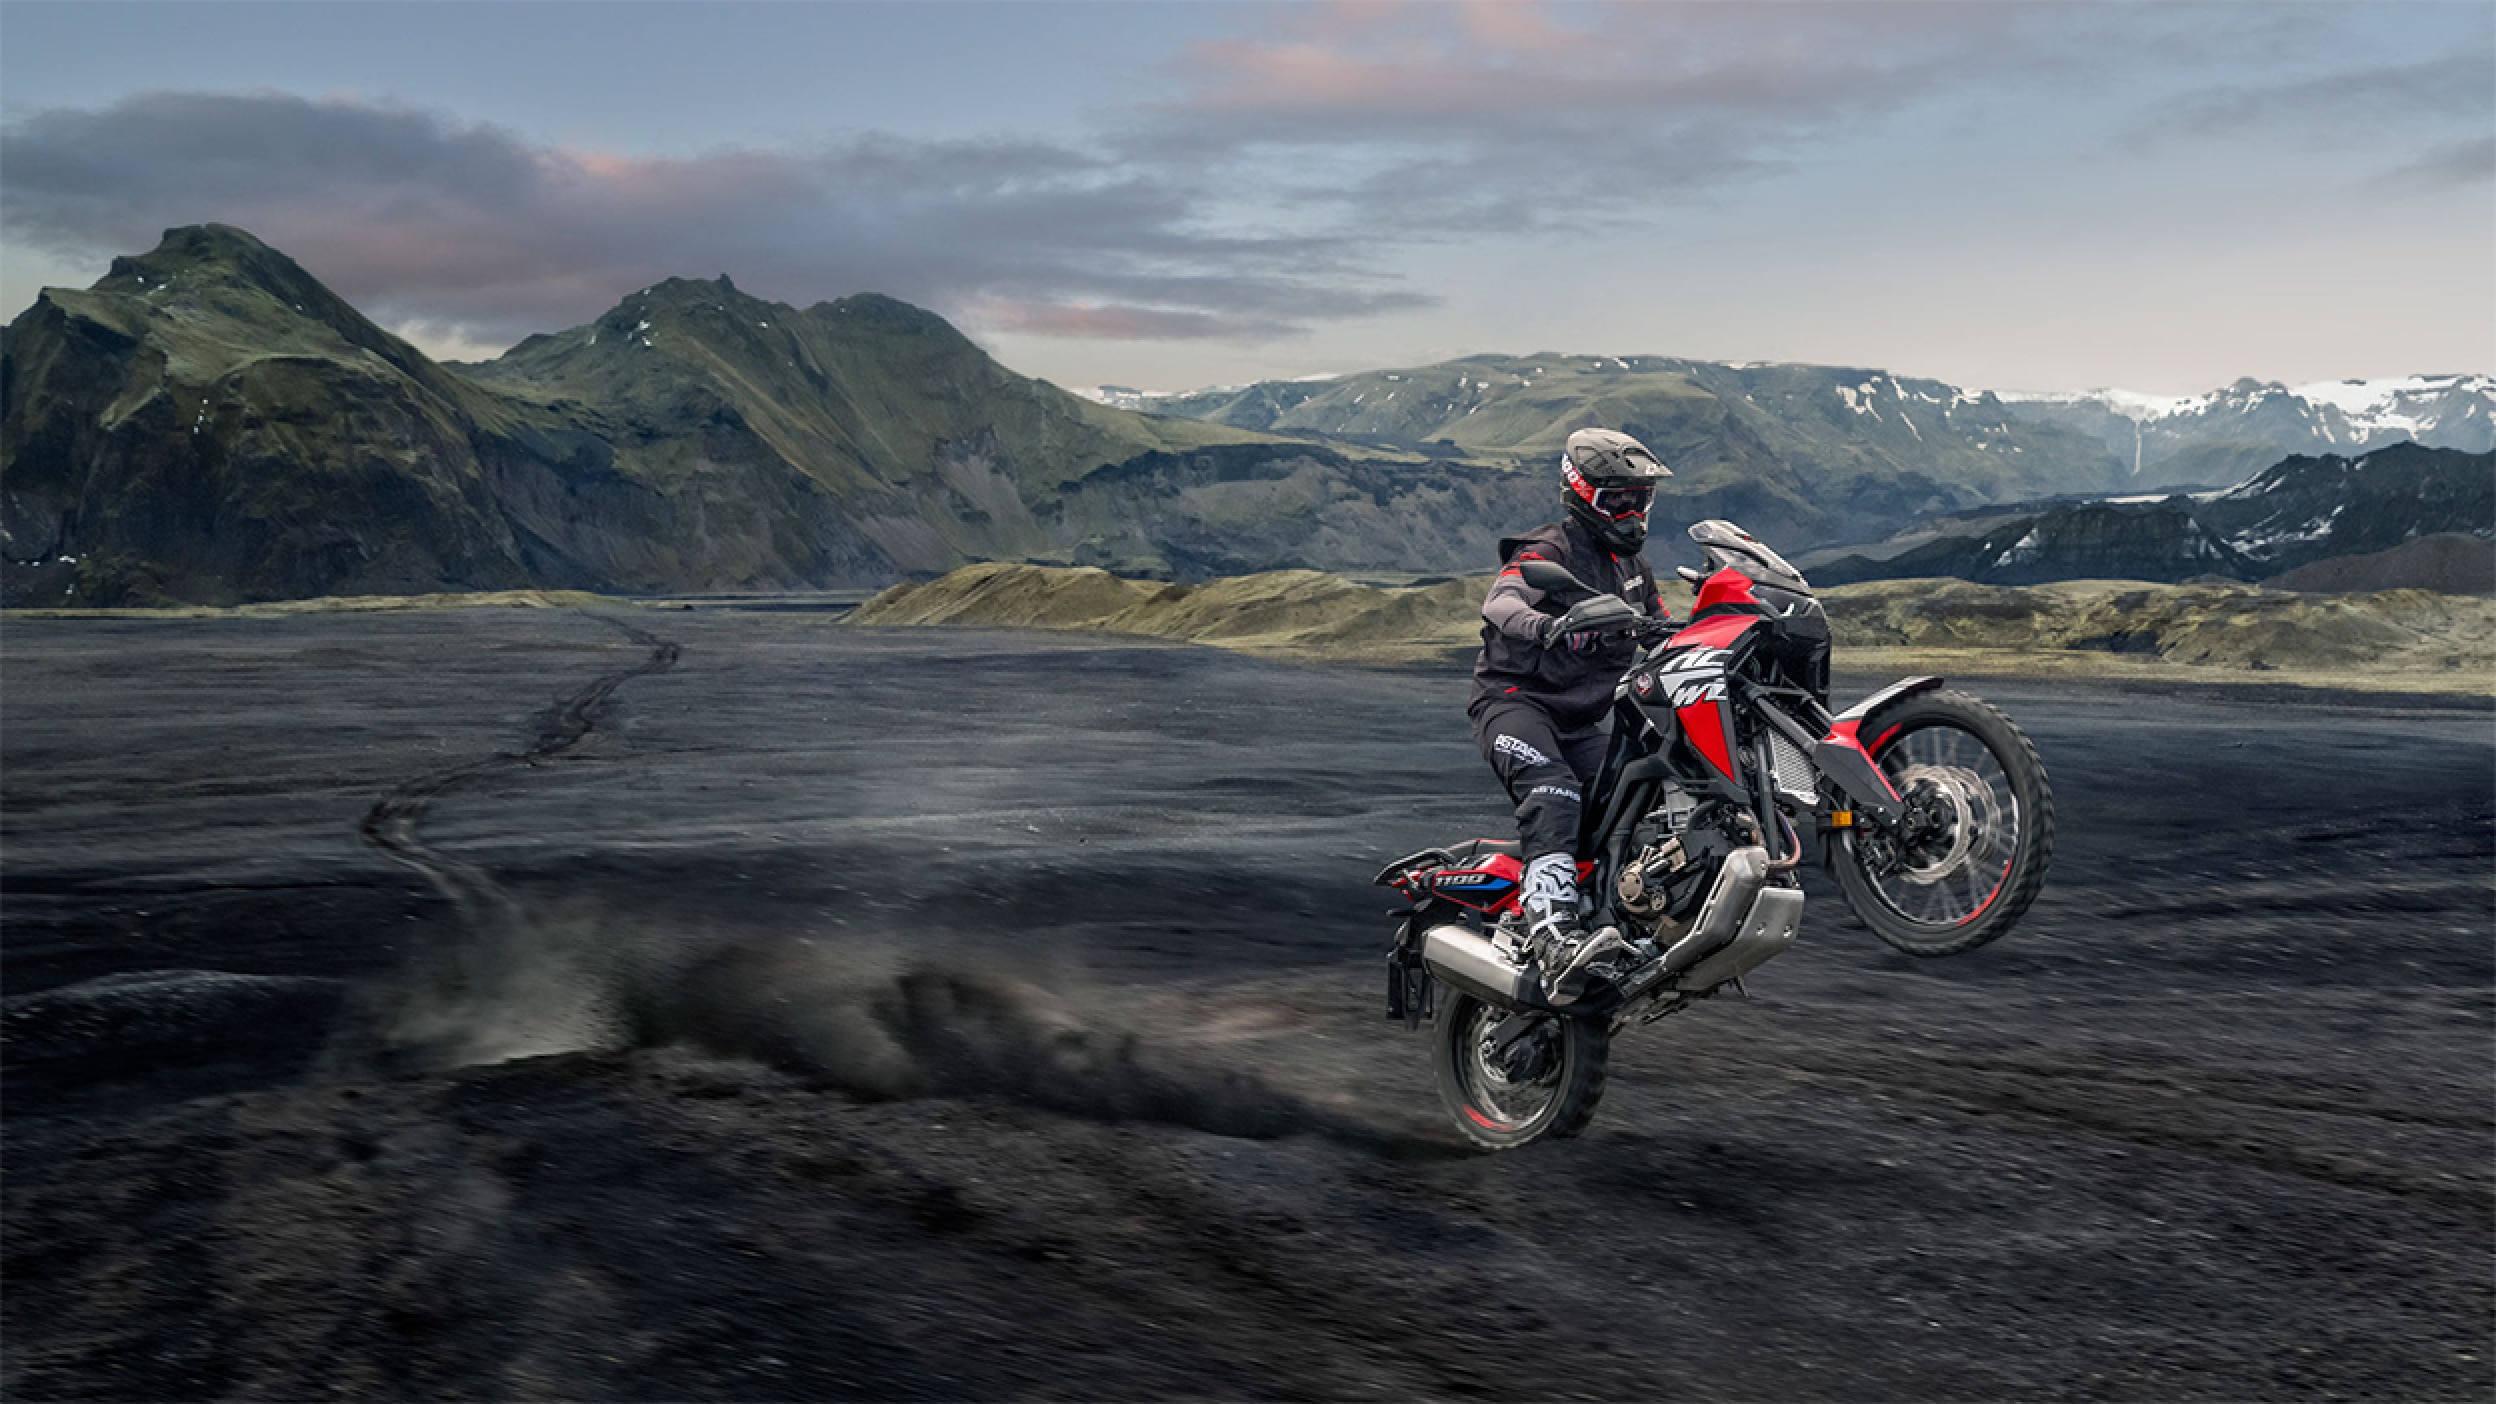 A professional rider on an Africa Twin doing a wheelie on black sand in the mountains